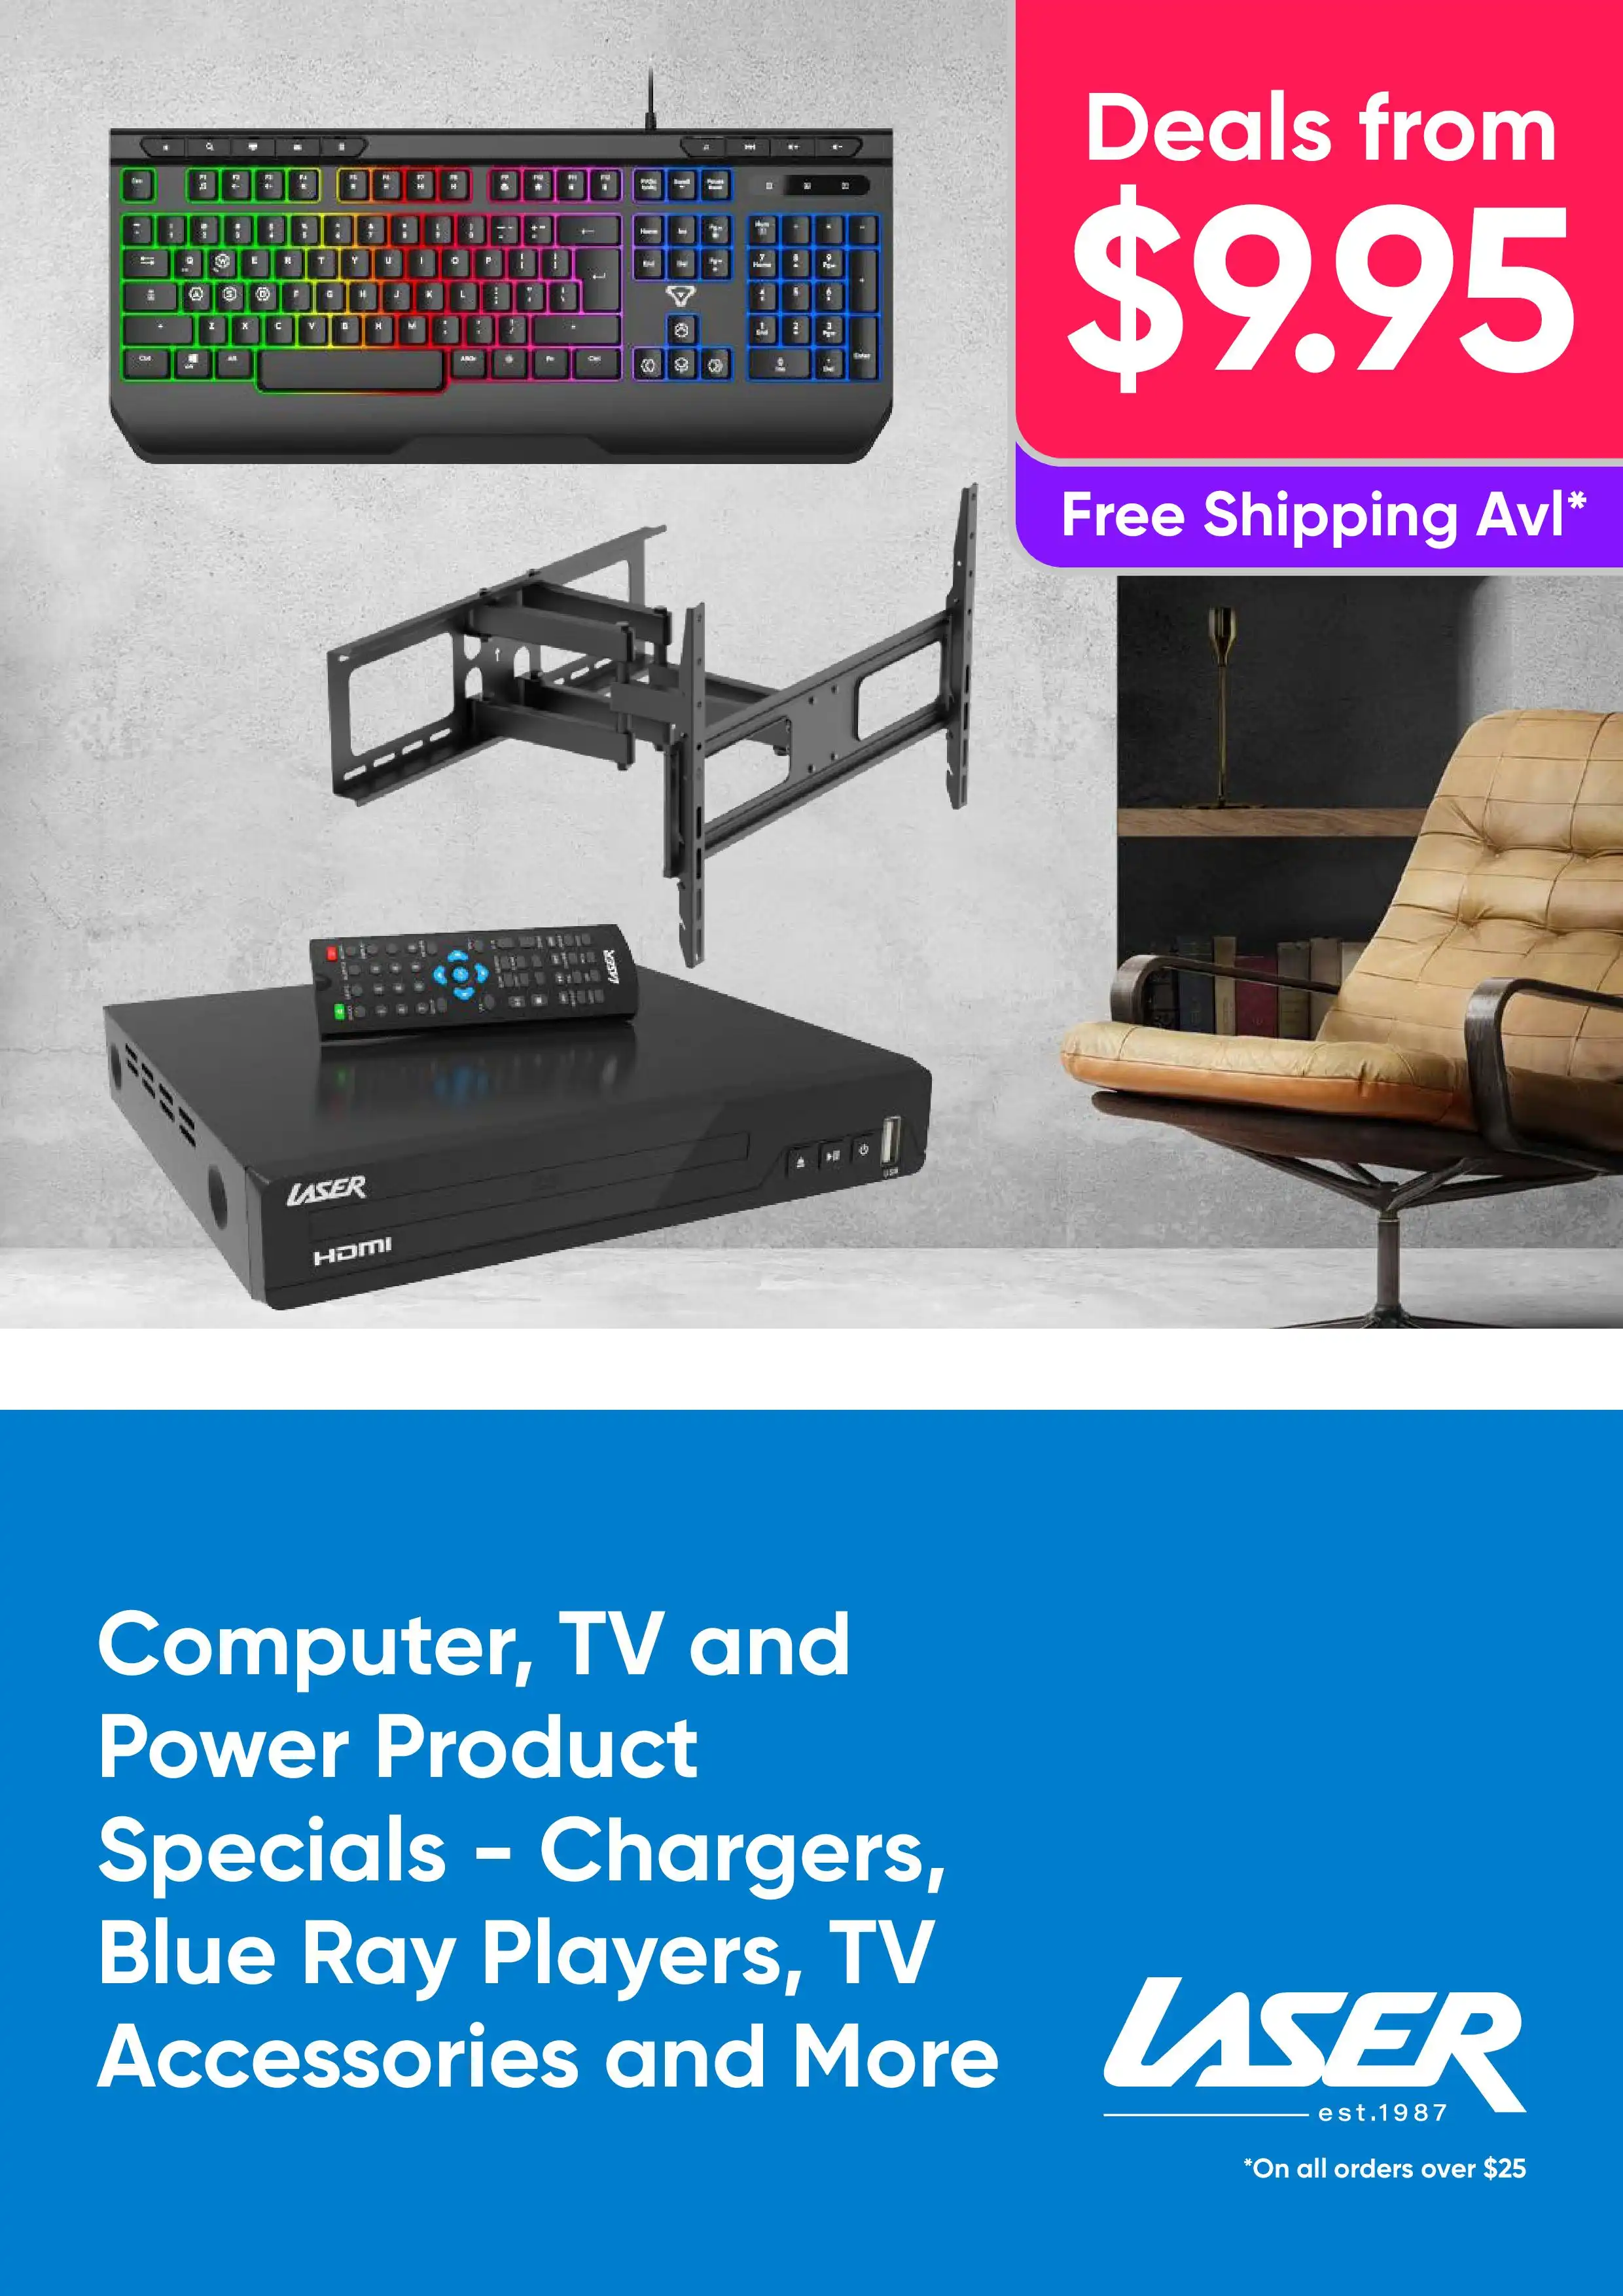 Shop Deals On Computer, TV and Power Products - Save On Chargers, Blue Ray, TV Accessories and More